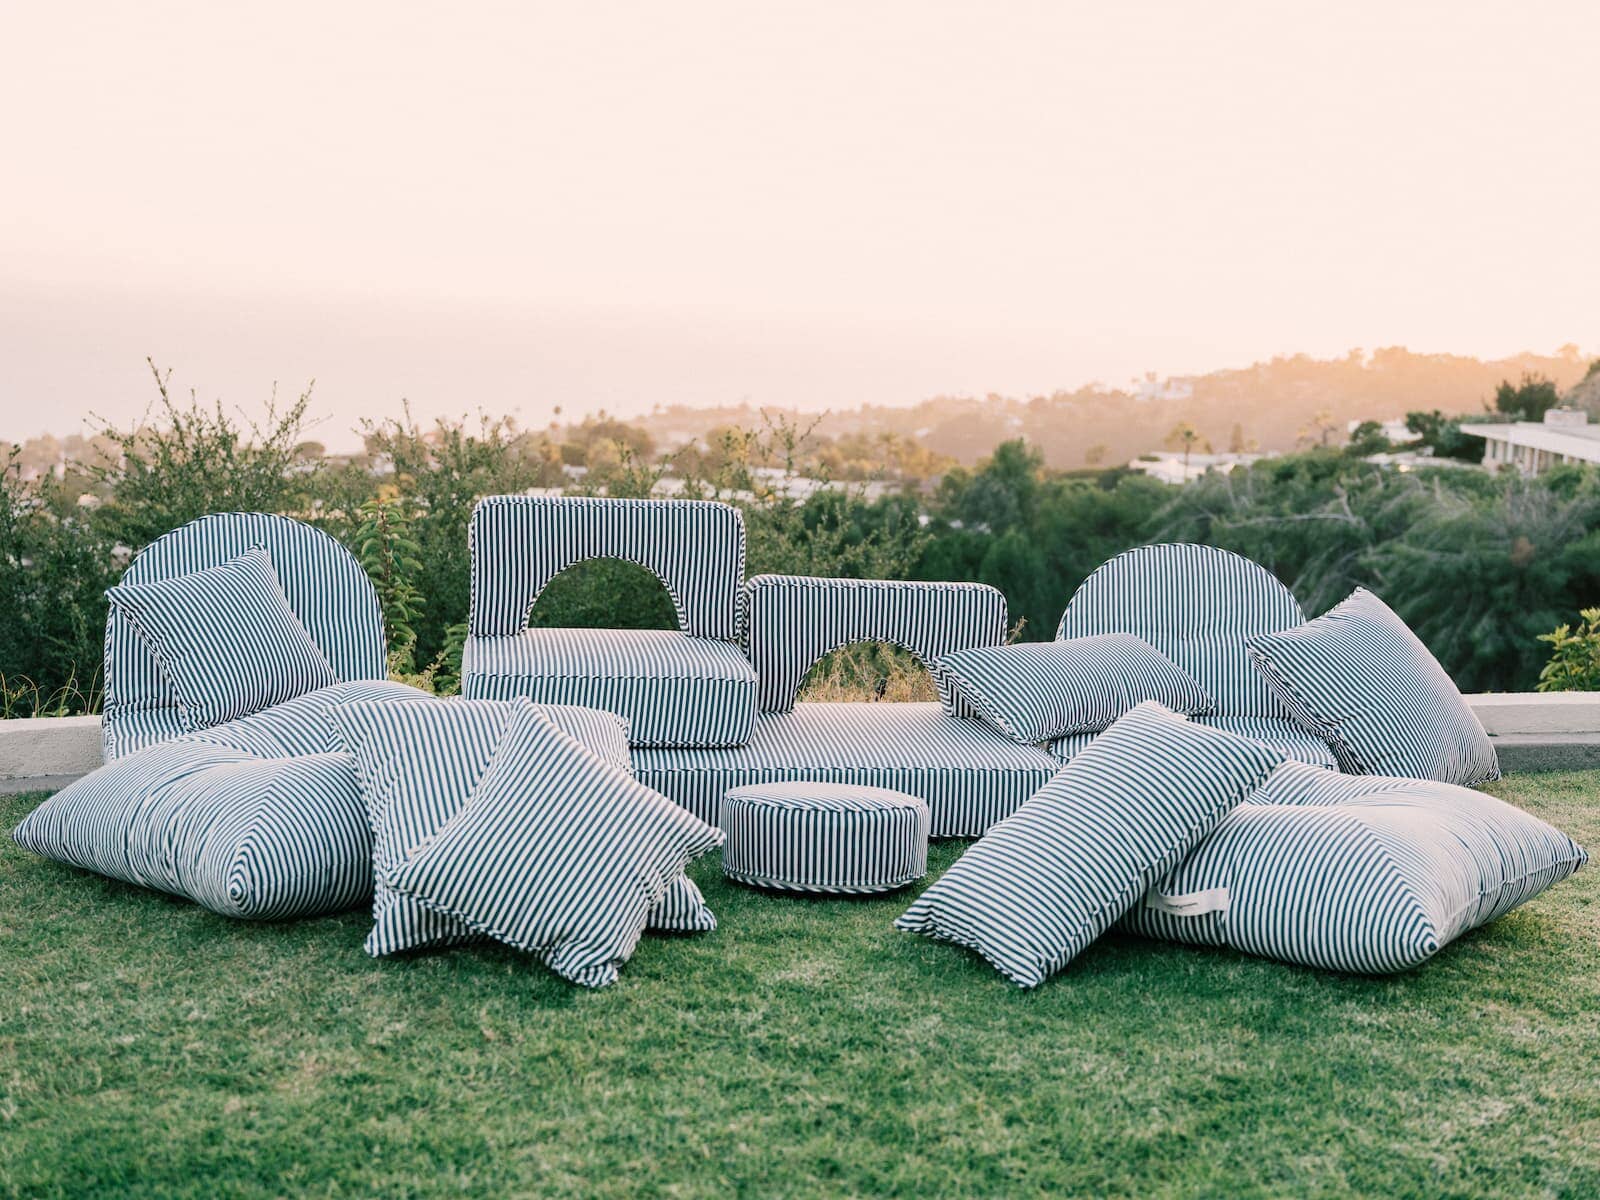 complete cushion collection on the grass